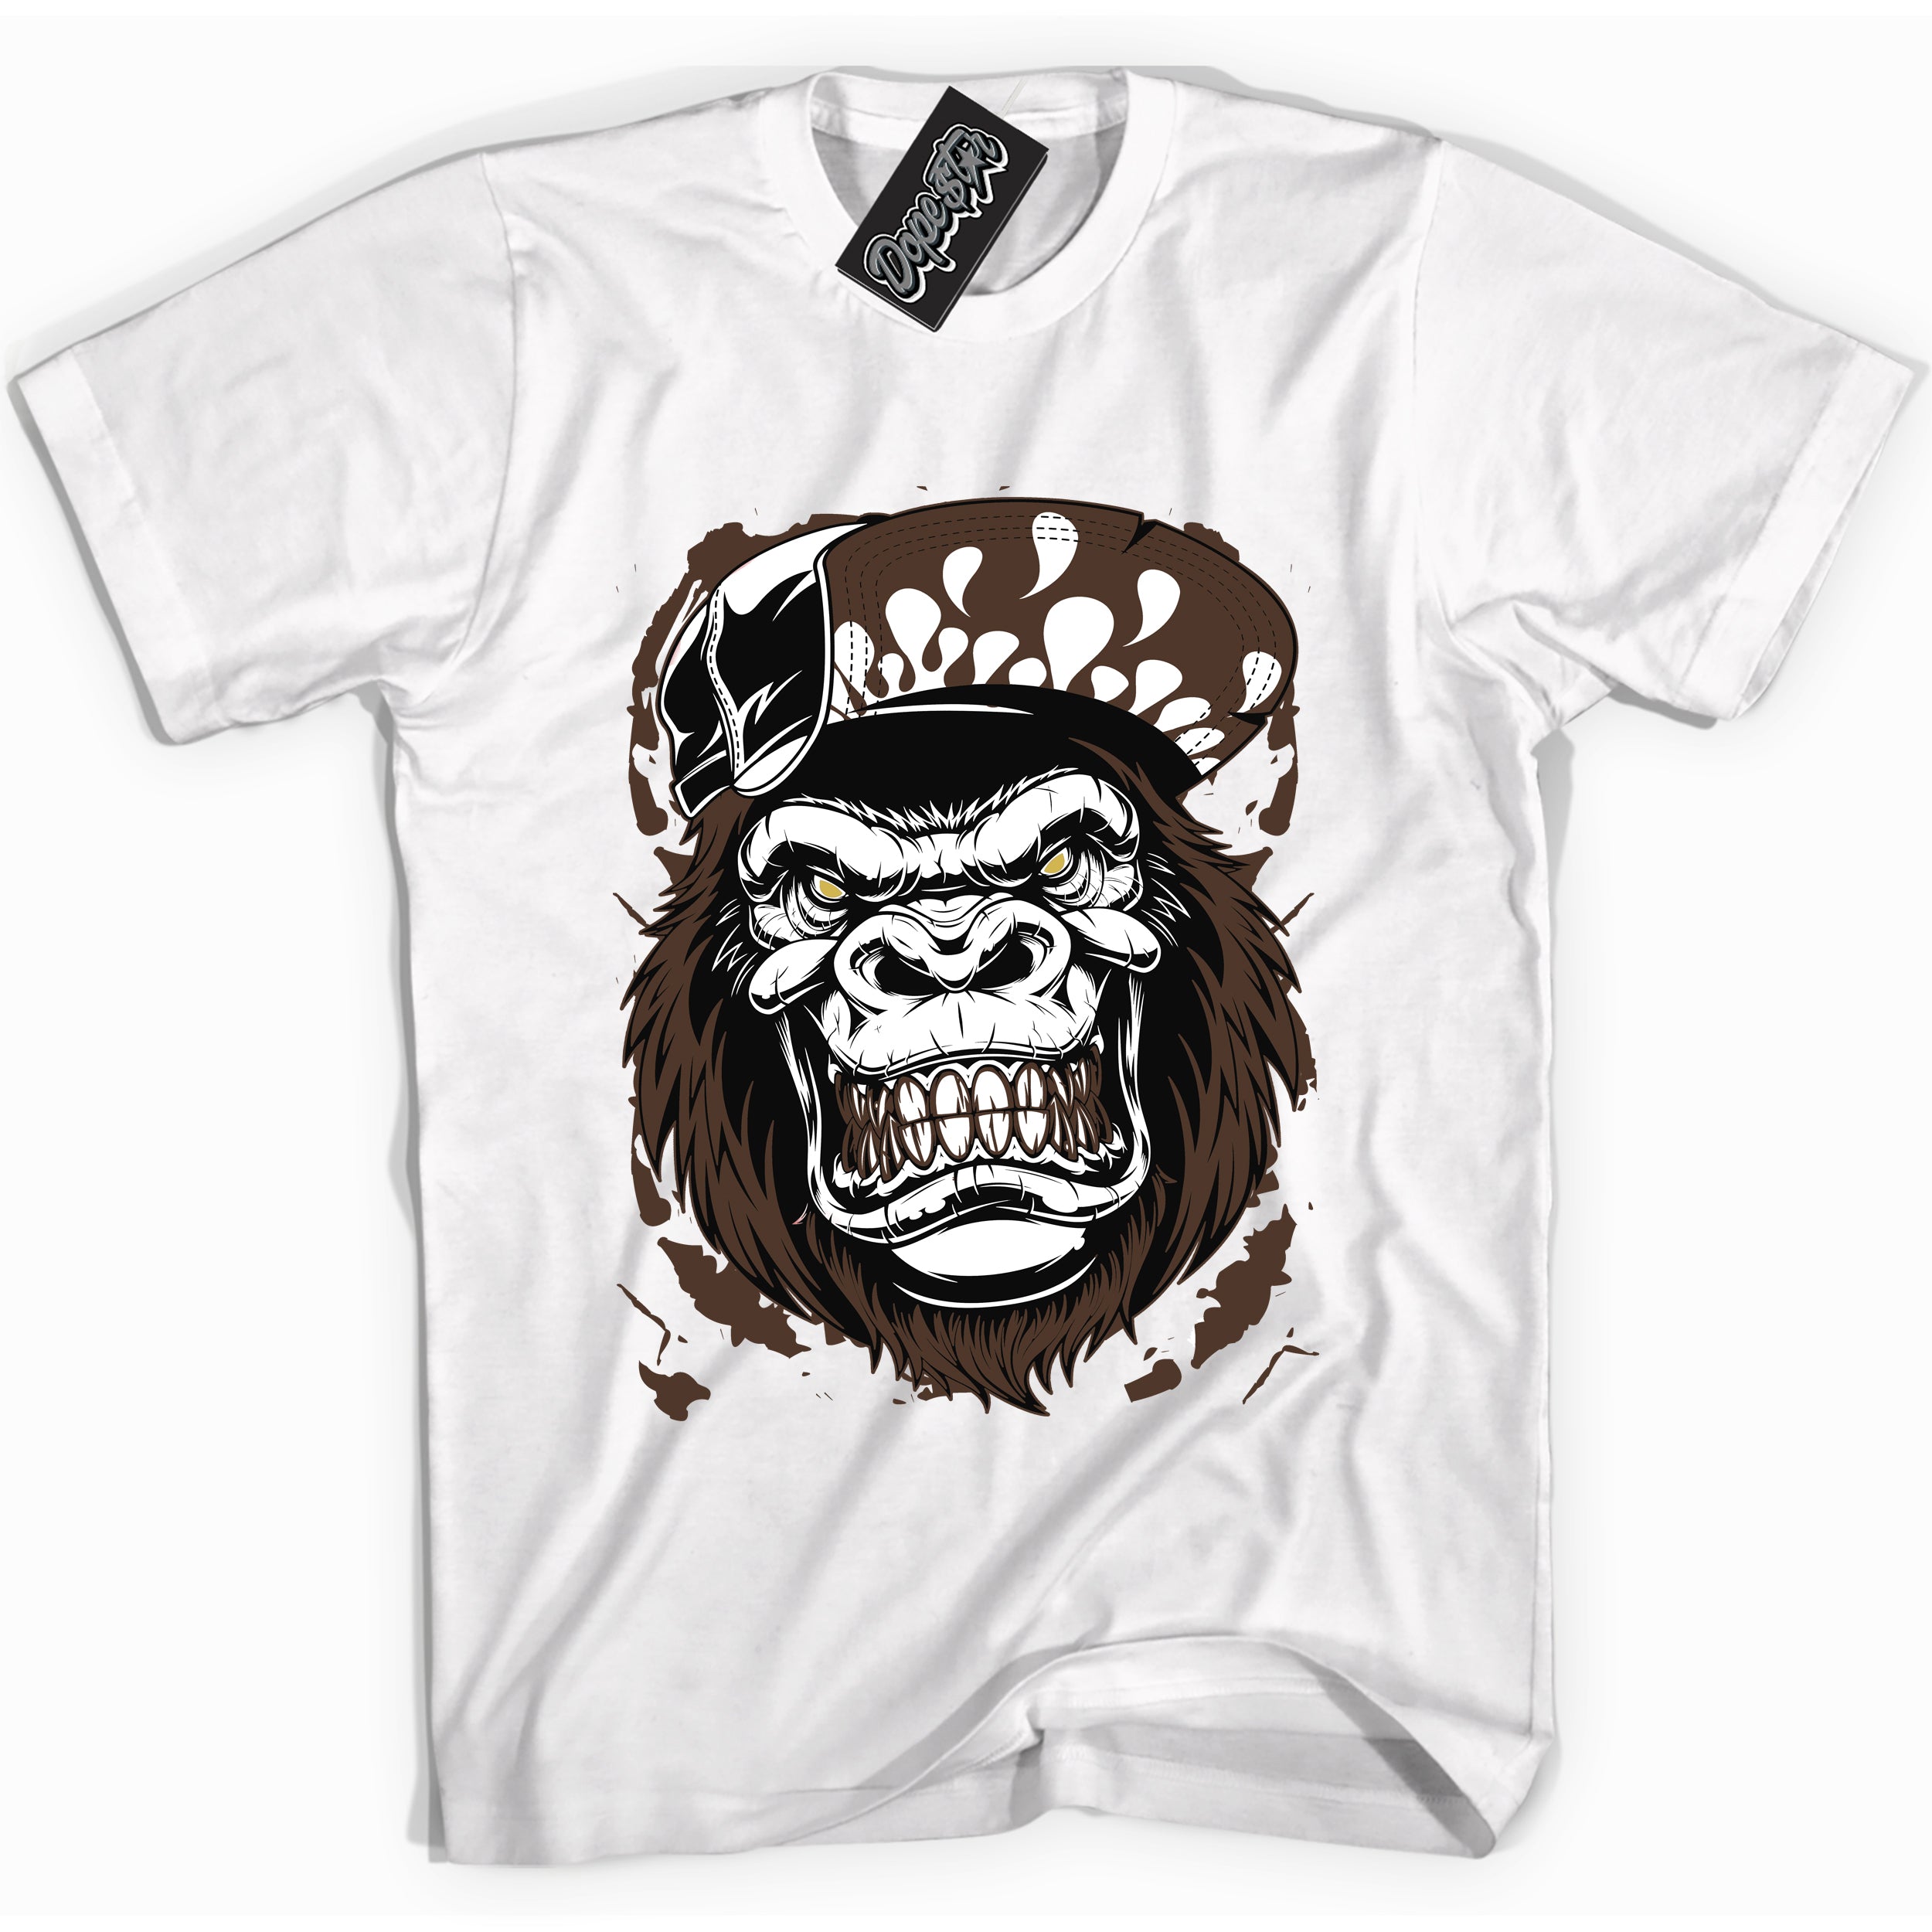 Cool White graphic tee with “ Gorilla Beast ” design, that perfectly matches Palomino 1s sneakers 